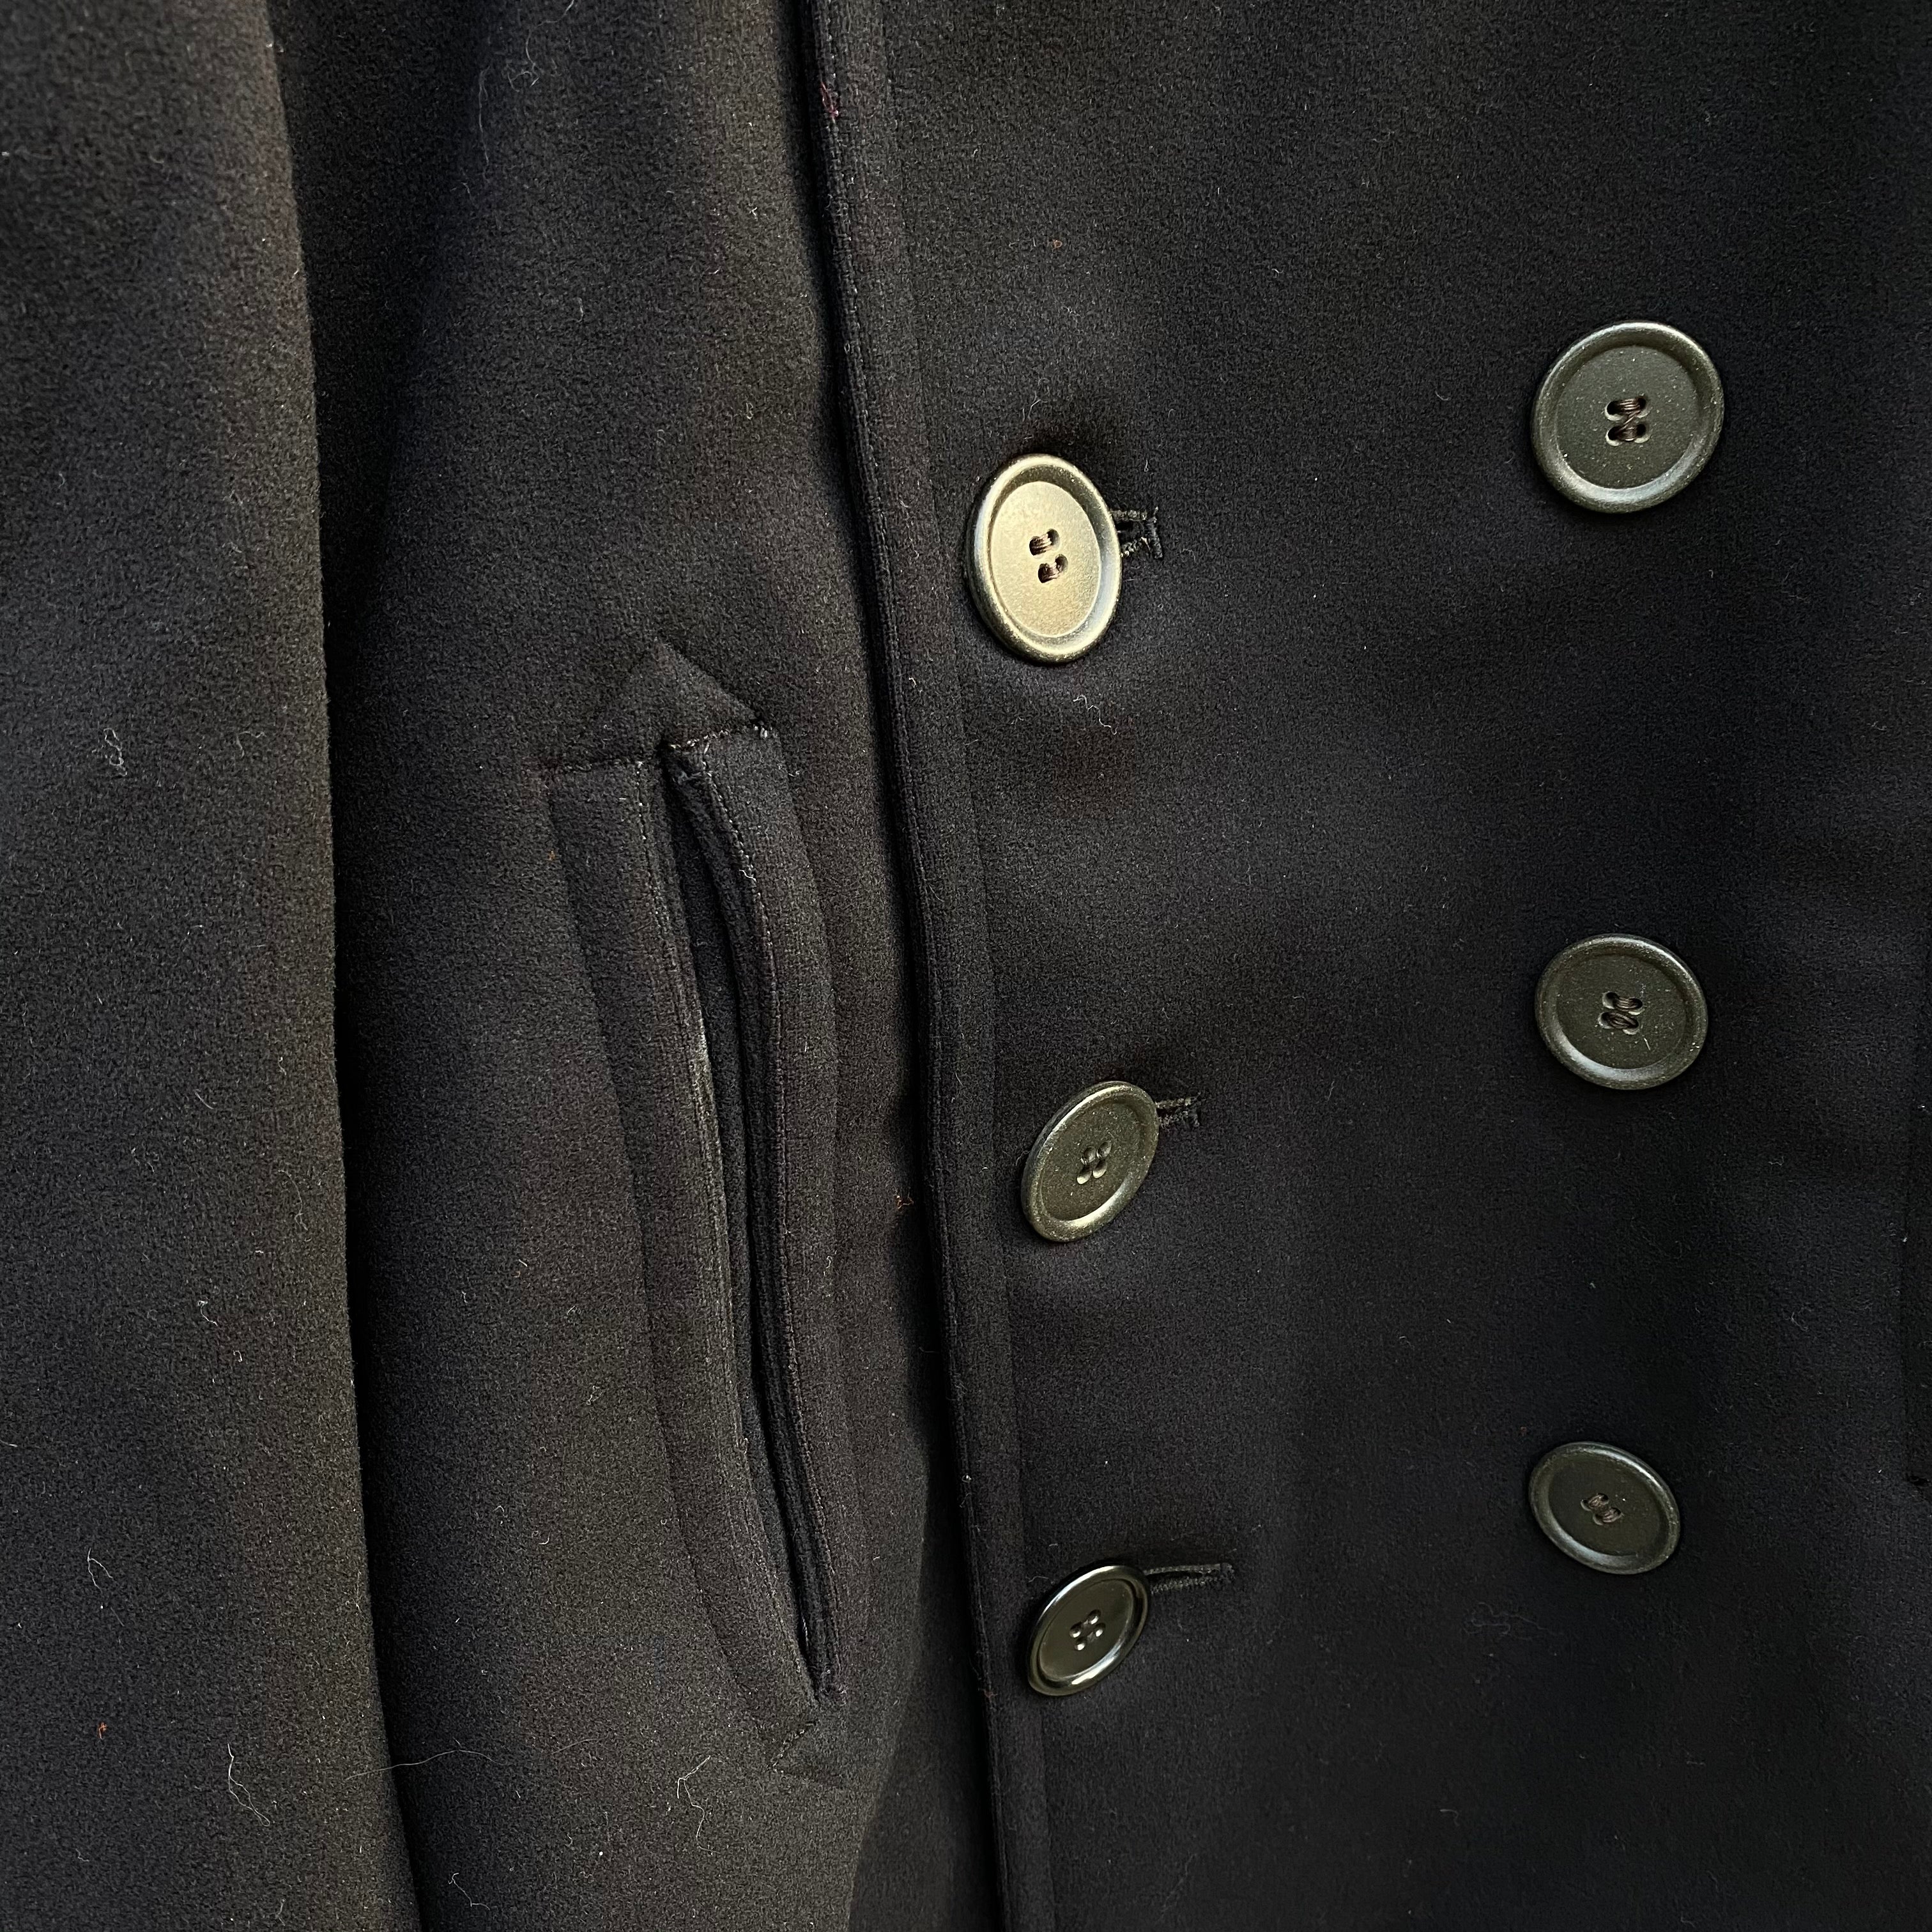 [ ONLY ONE ! ] U. S. NAVY PEA COAT / Mr.Clean Select